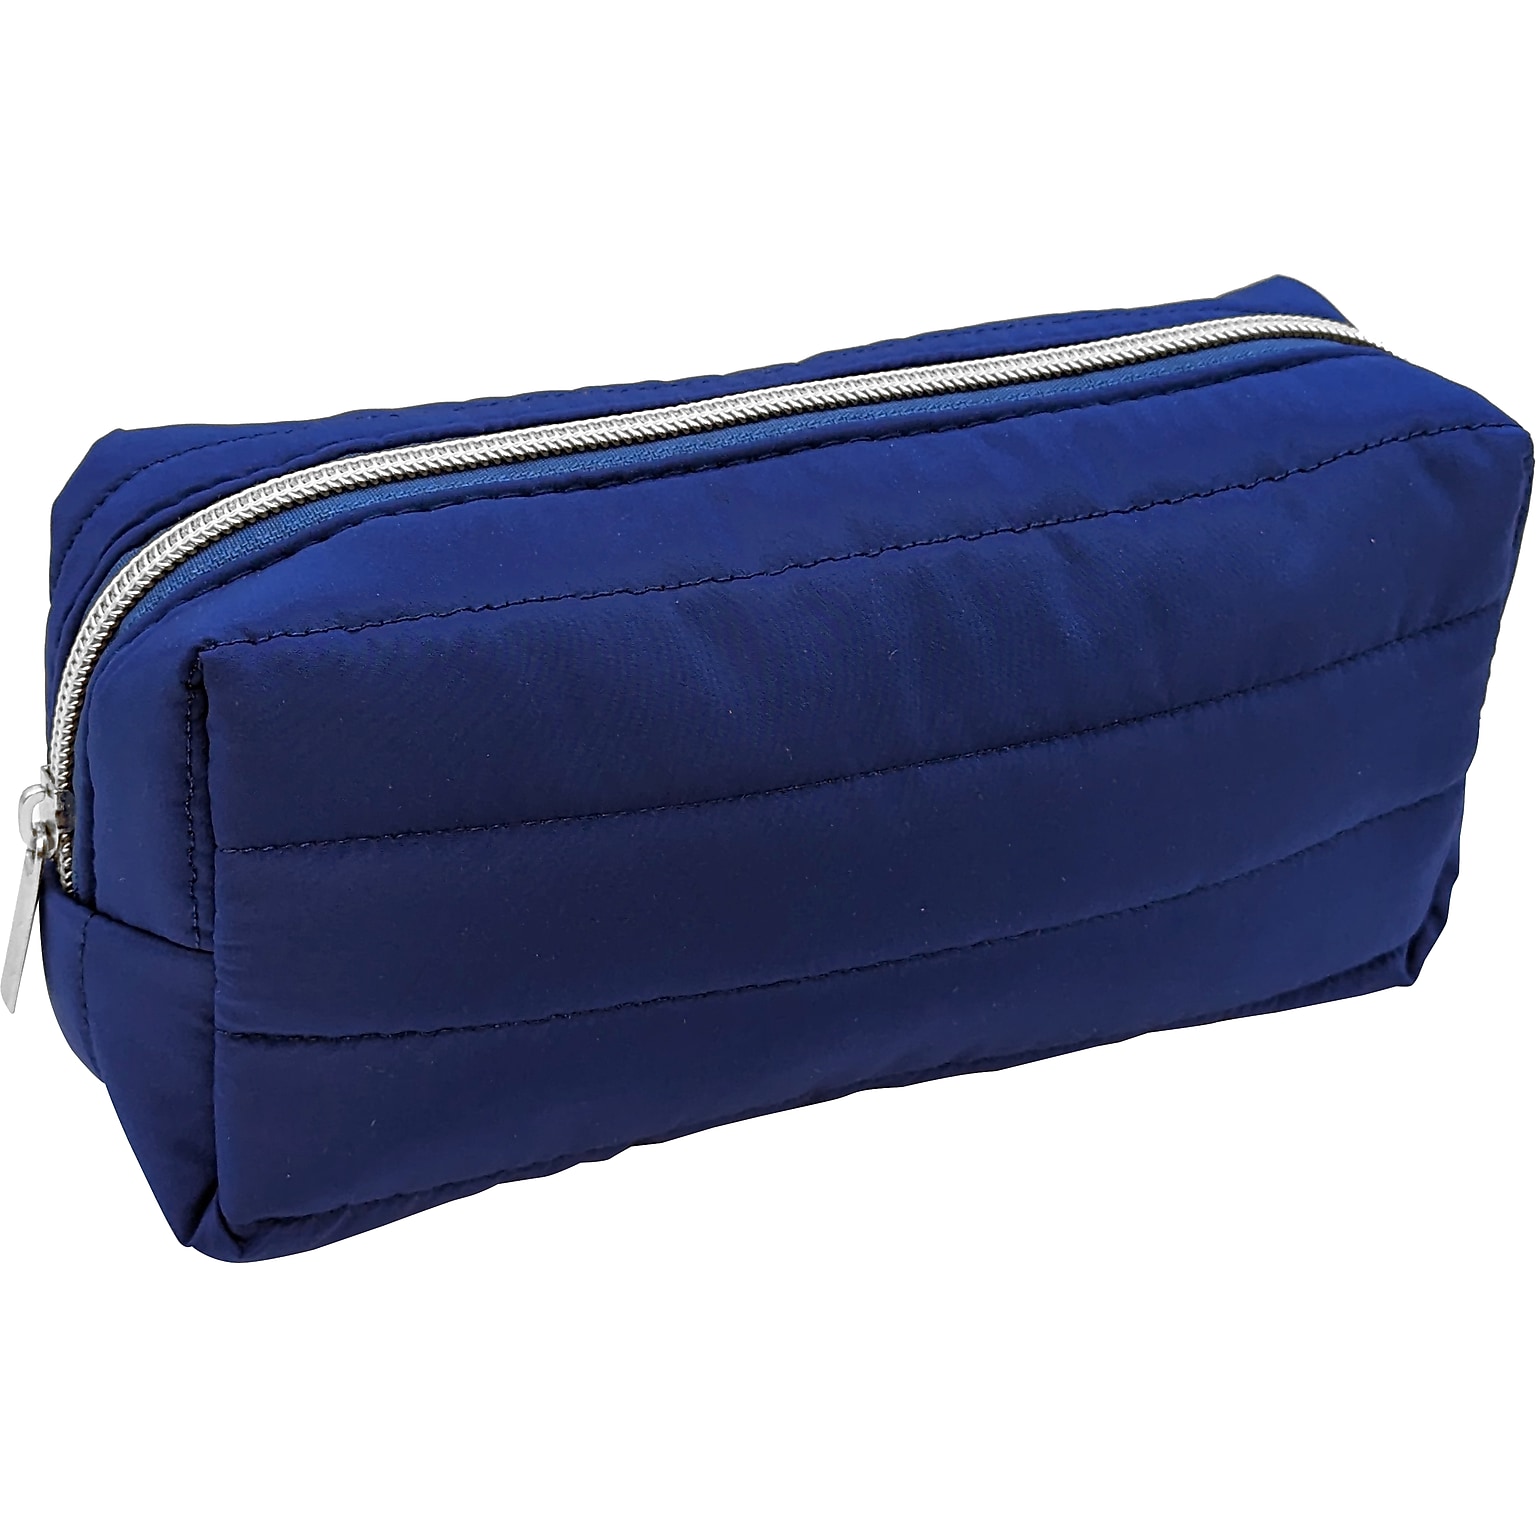 Quilted Lightweight Portable Pen Bag Product Details